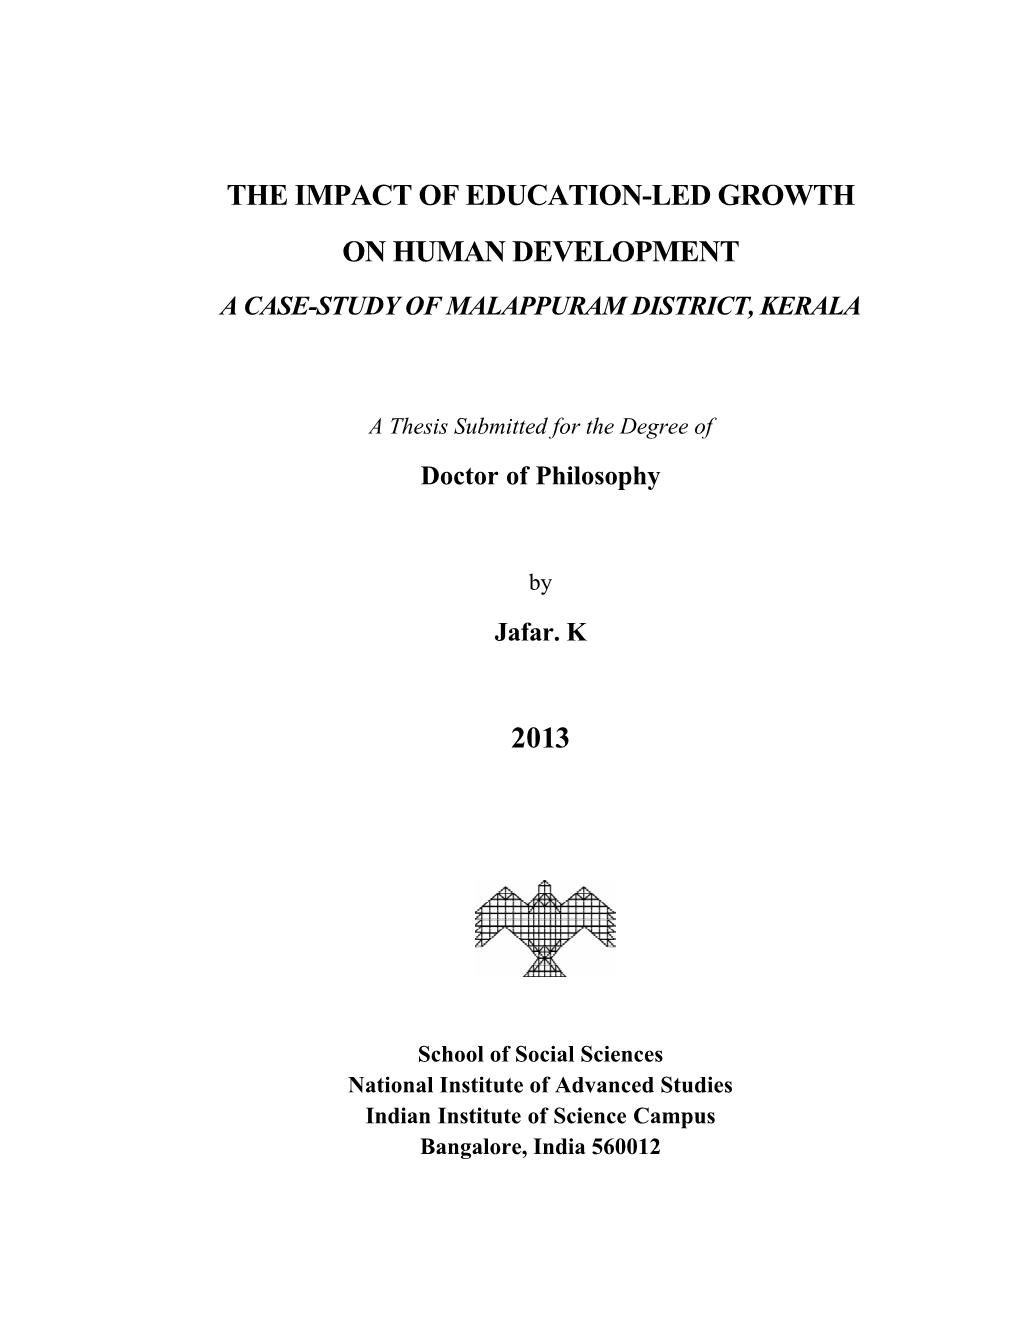 The Impact of Education-Led Growth on Human Development 2013